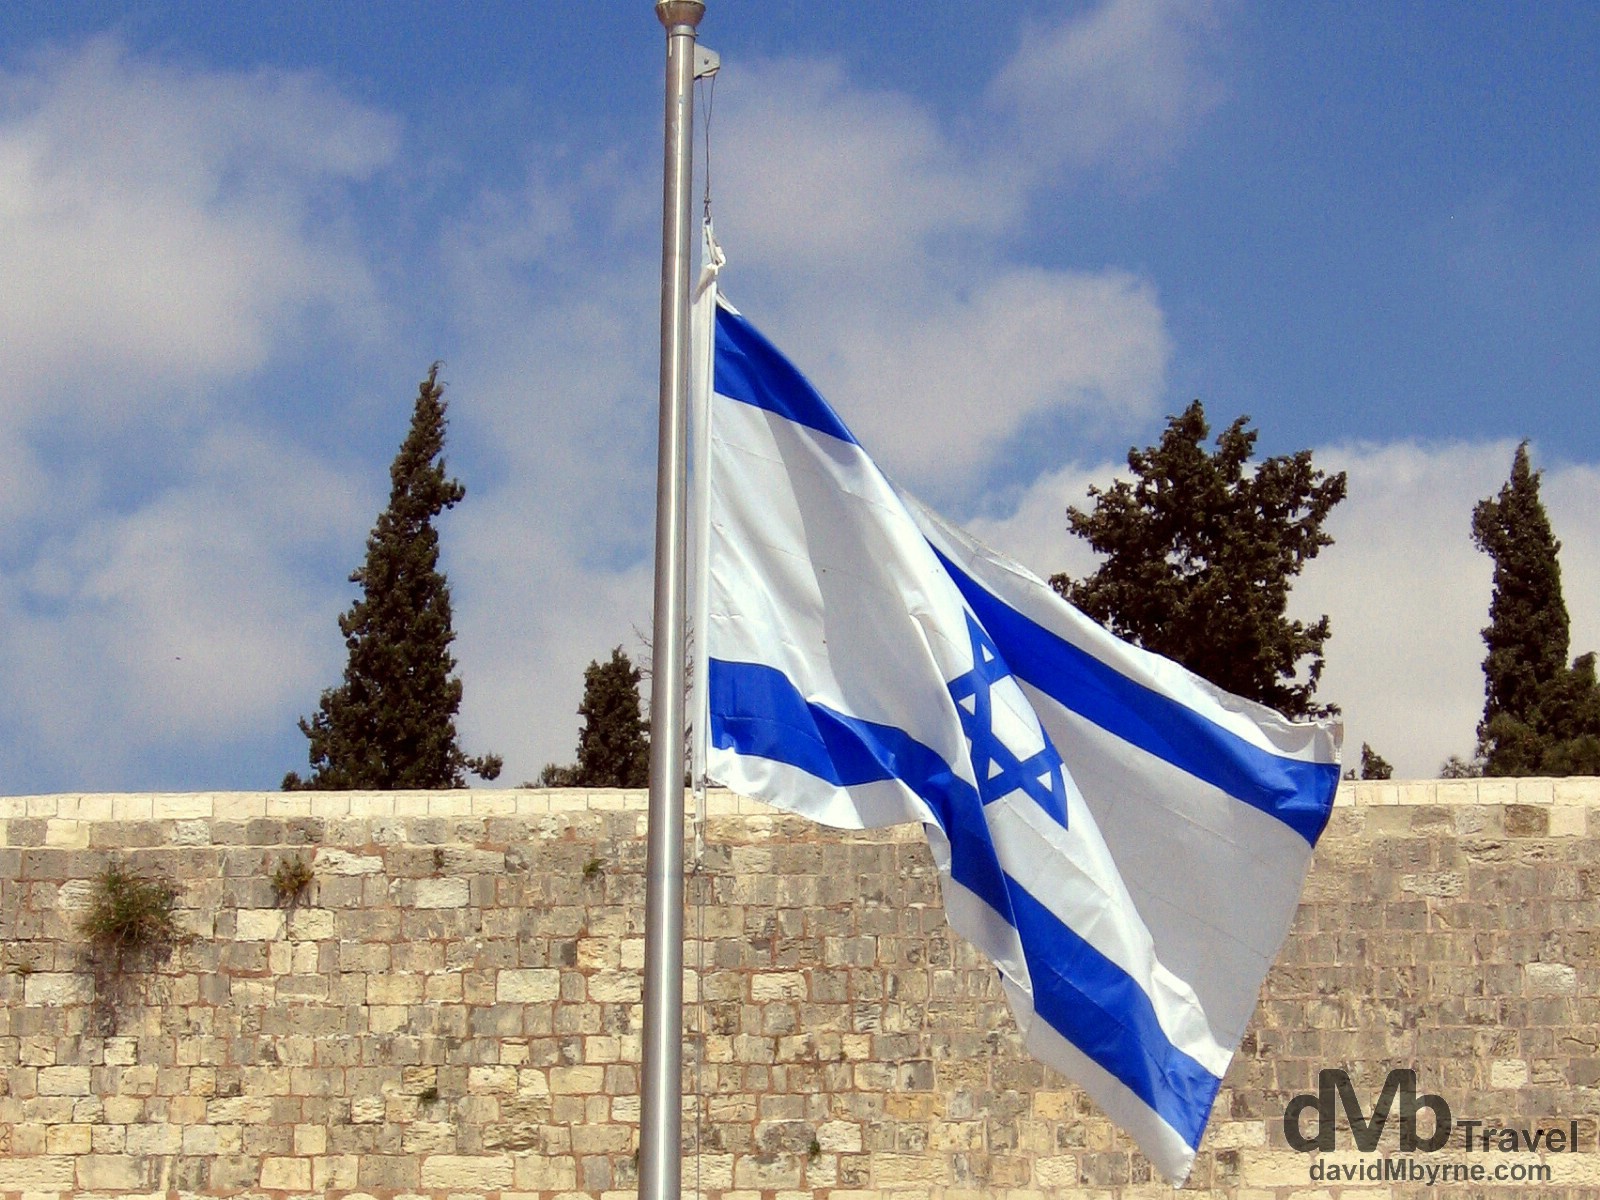 A Israeli flag flying near the Western / Wailing Wall in the Old City of Jerusalem, Israel. May 2, 2008.  